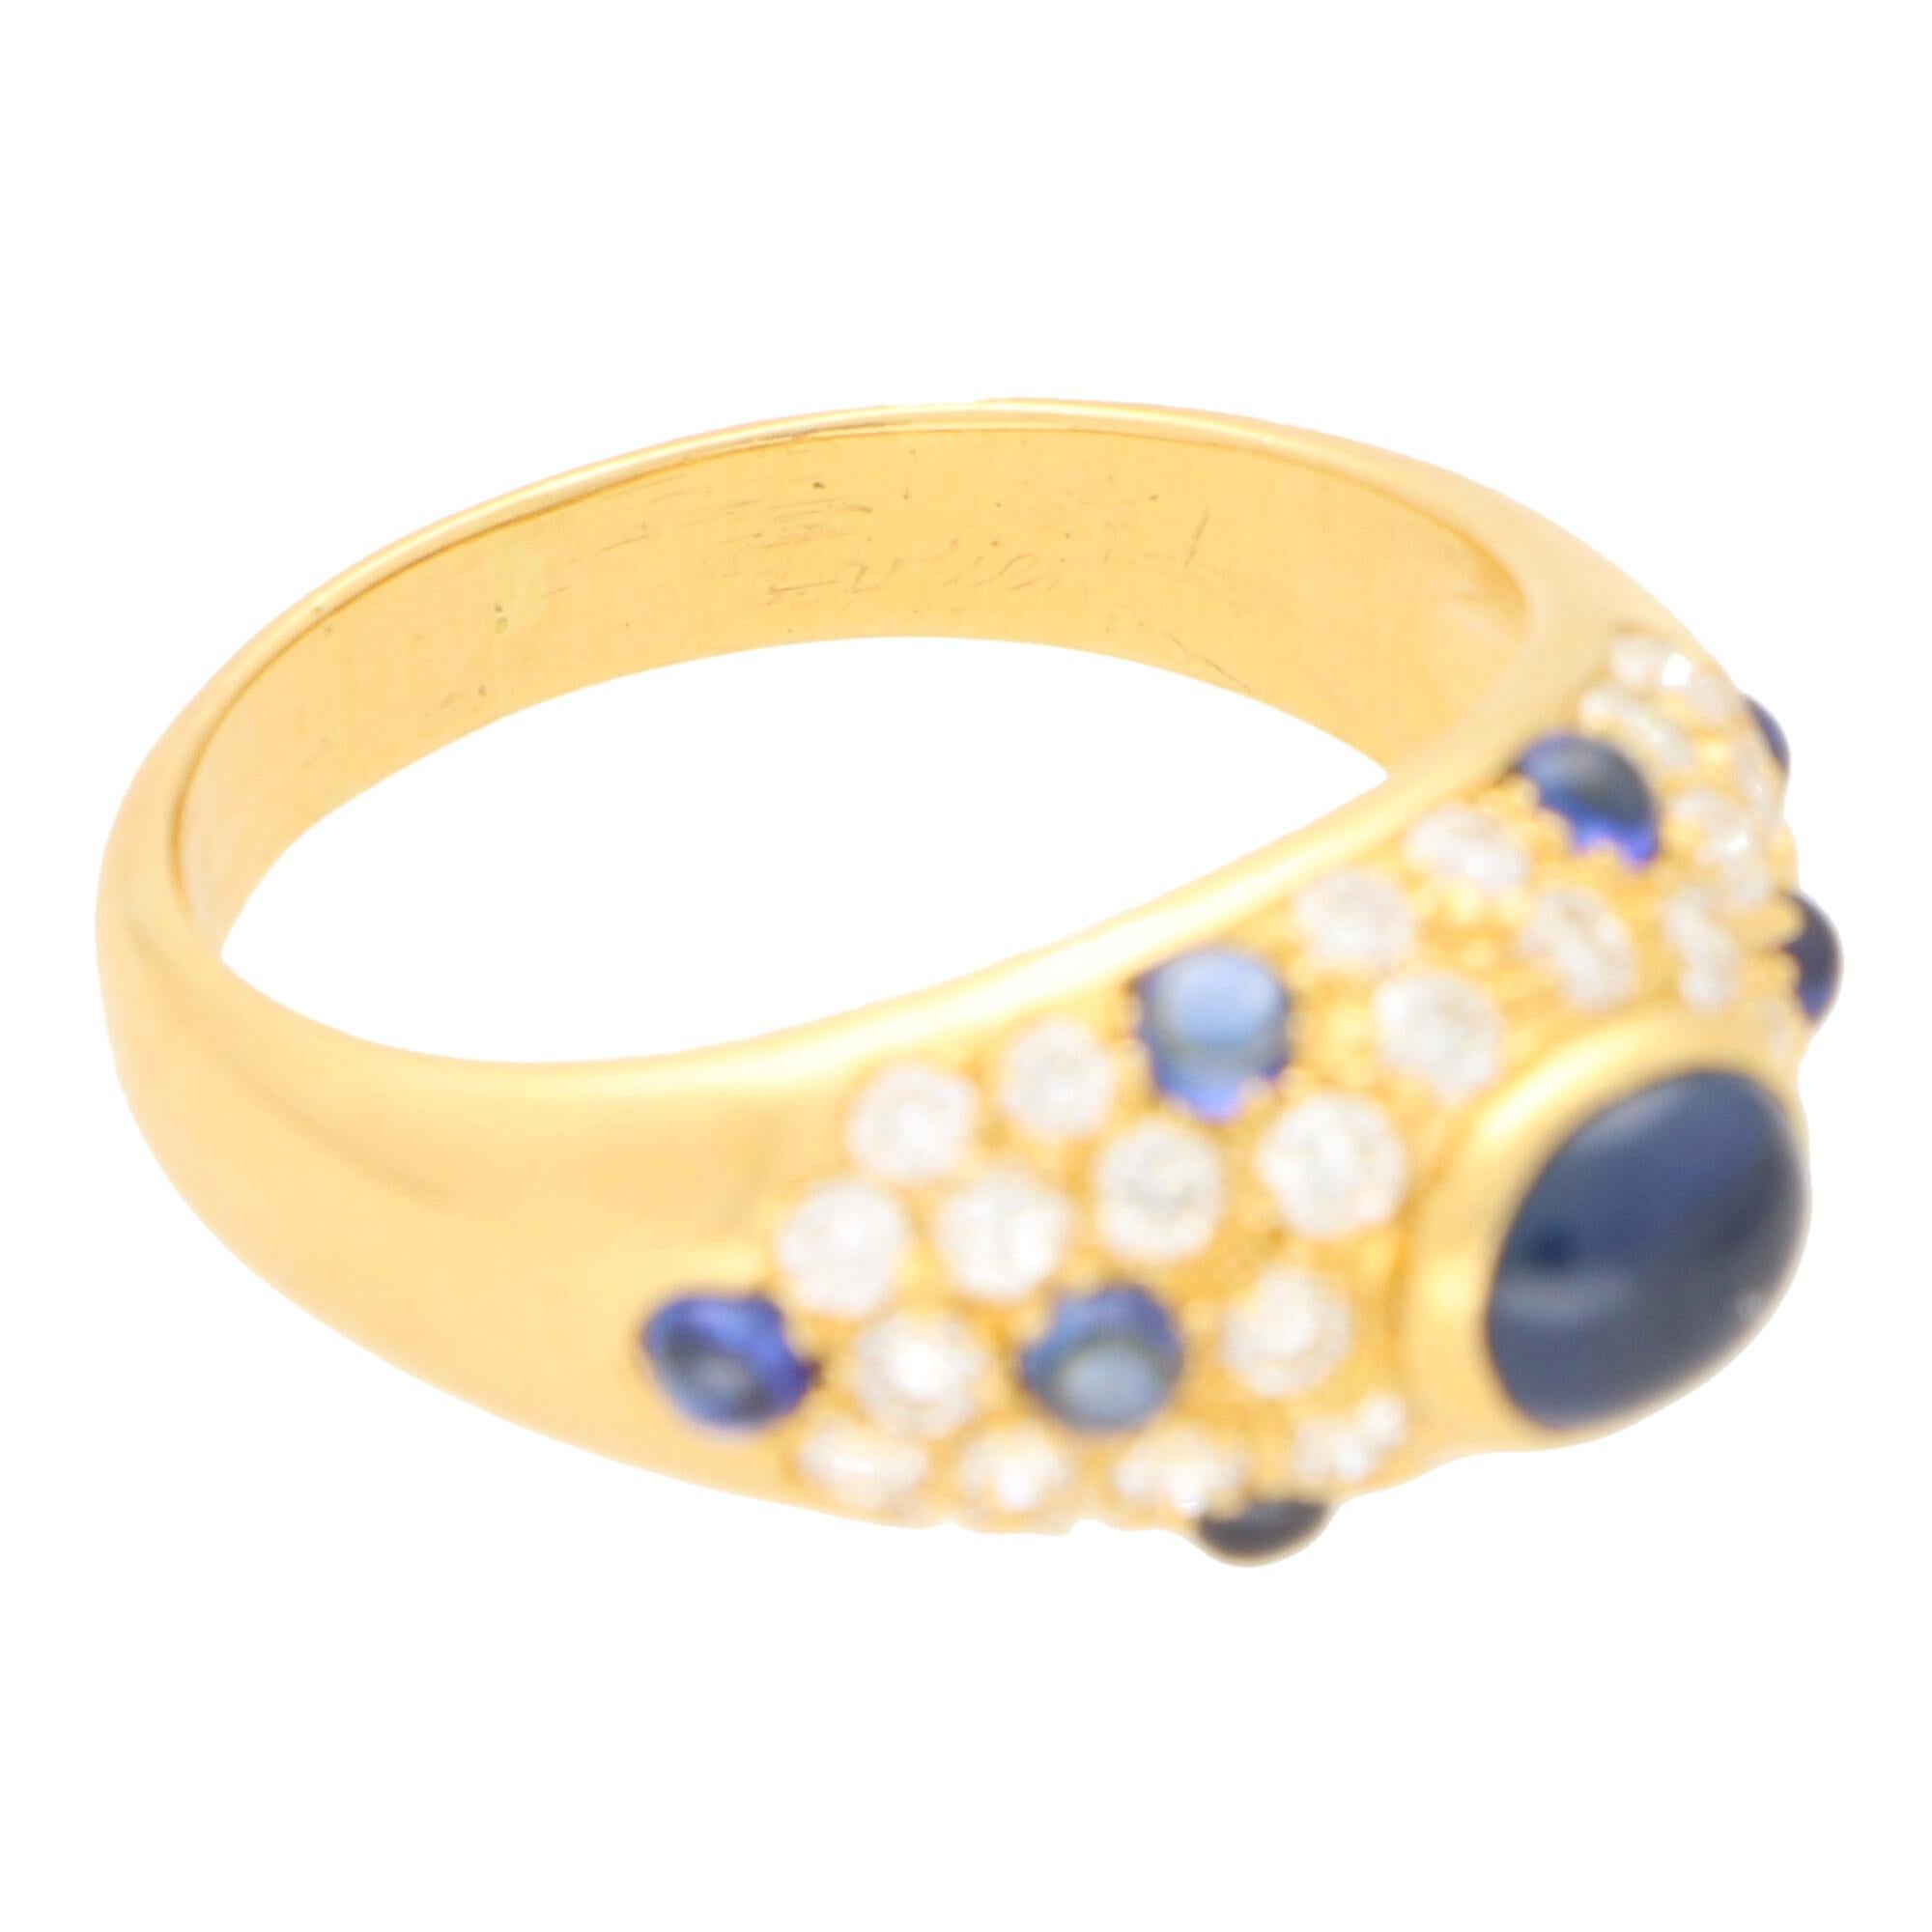 Cabochon Vintage Cartier Sapphire and Diamond Dome Bombe Ring Set in 18k Yellow Gold